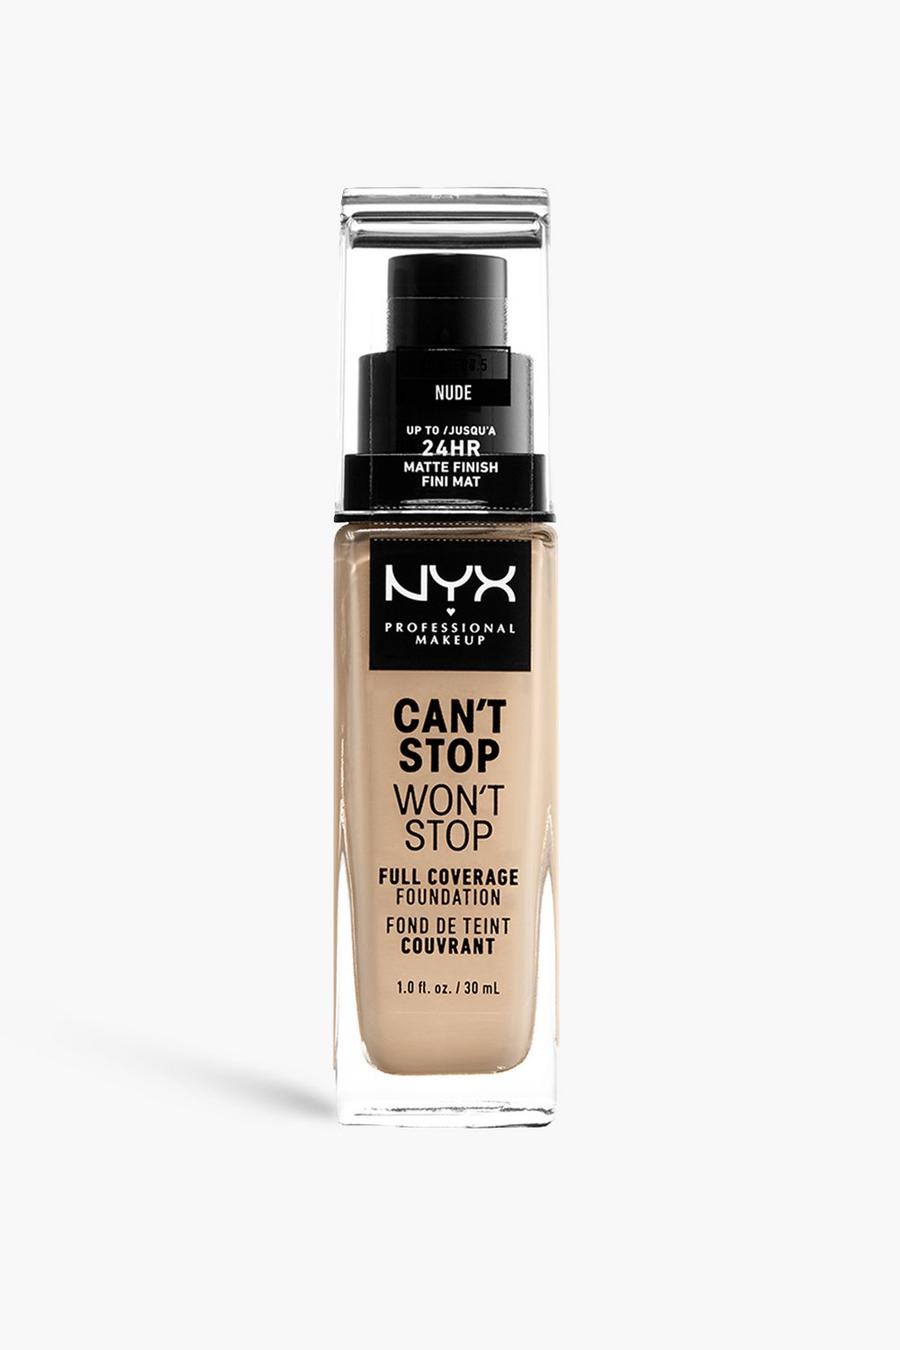 NYX Professional Makeup - Fond de teint couvrant - Can't Stop Won't Stop, Nude image number 1